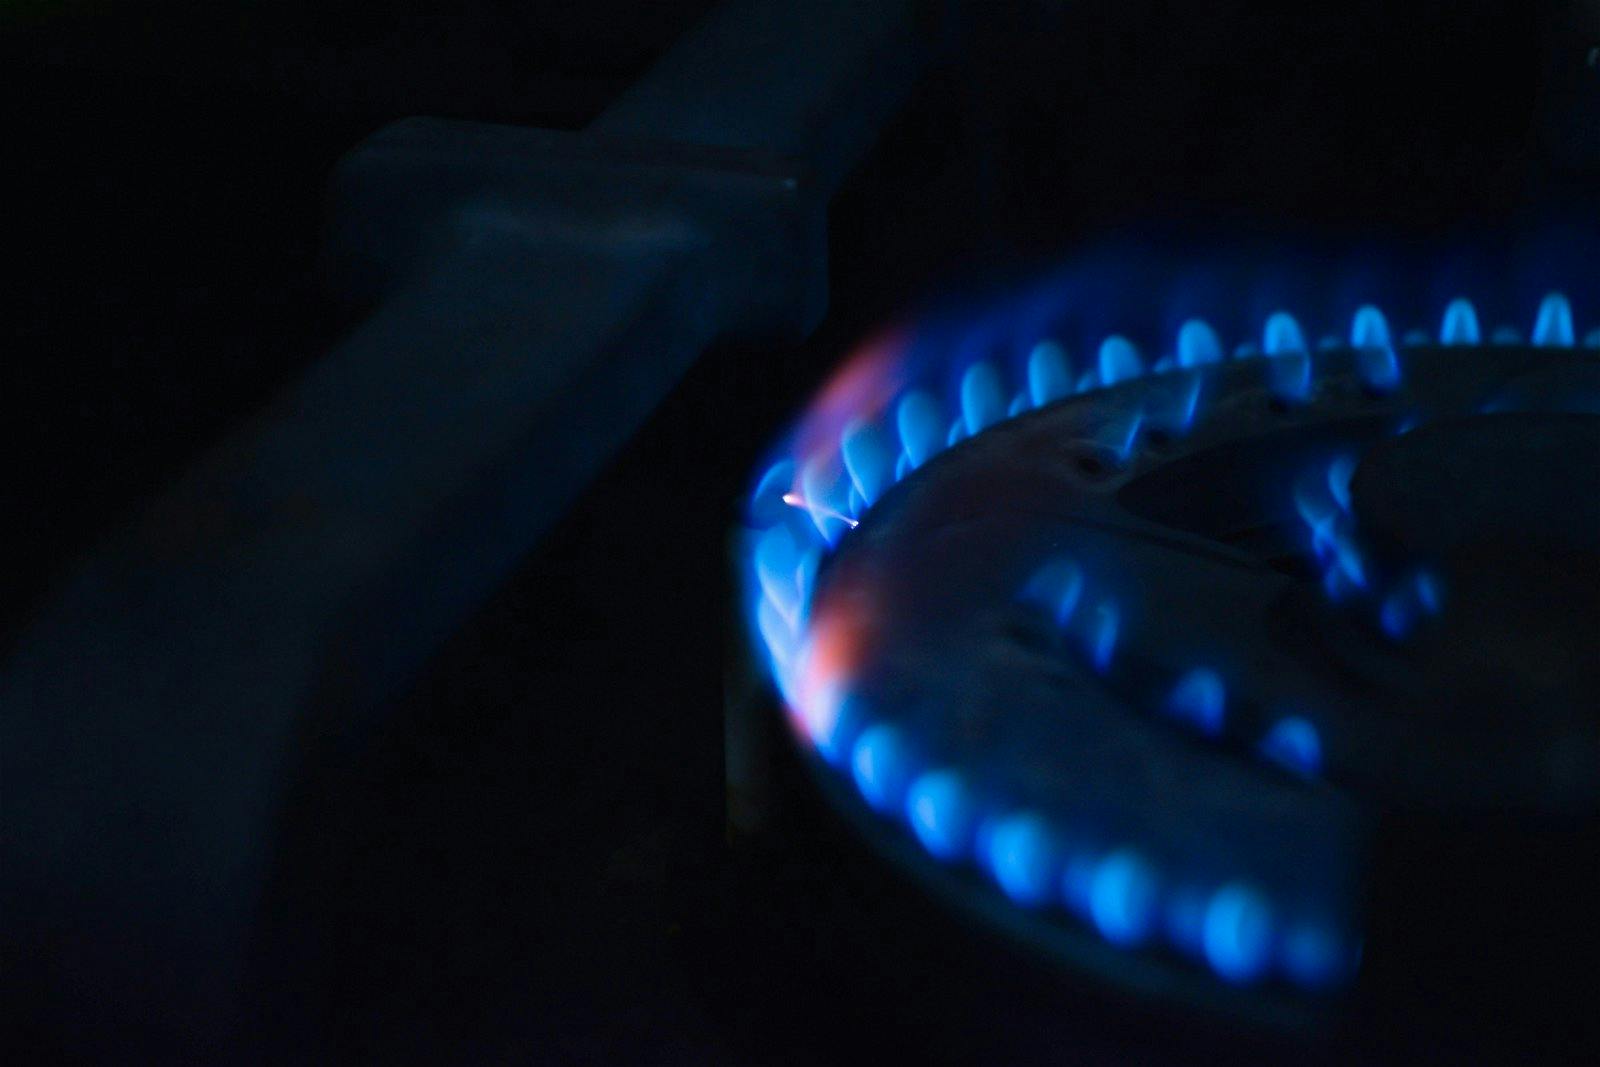 LPG, a useful “transitional” fuel for the UN’s clean cooking effort